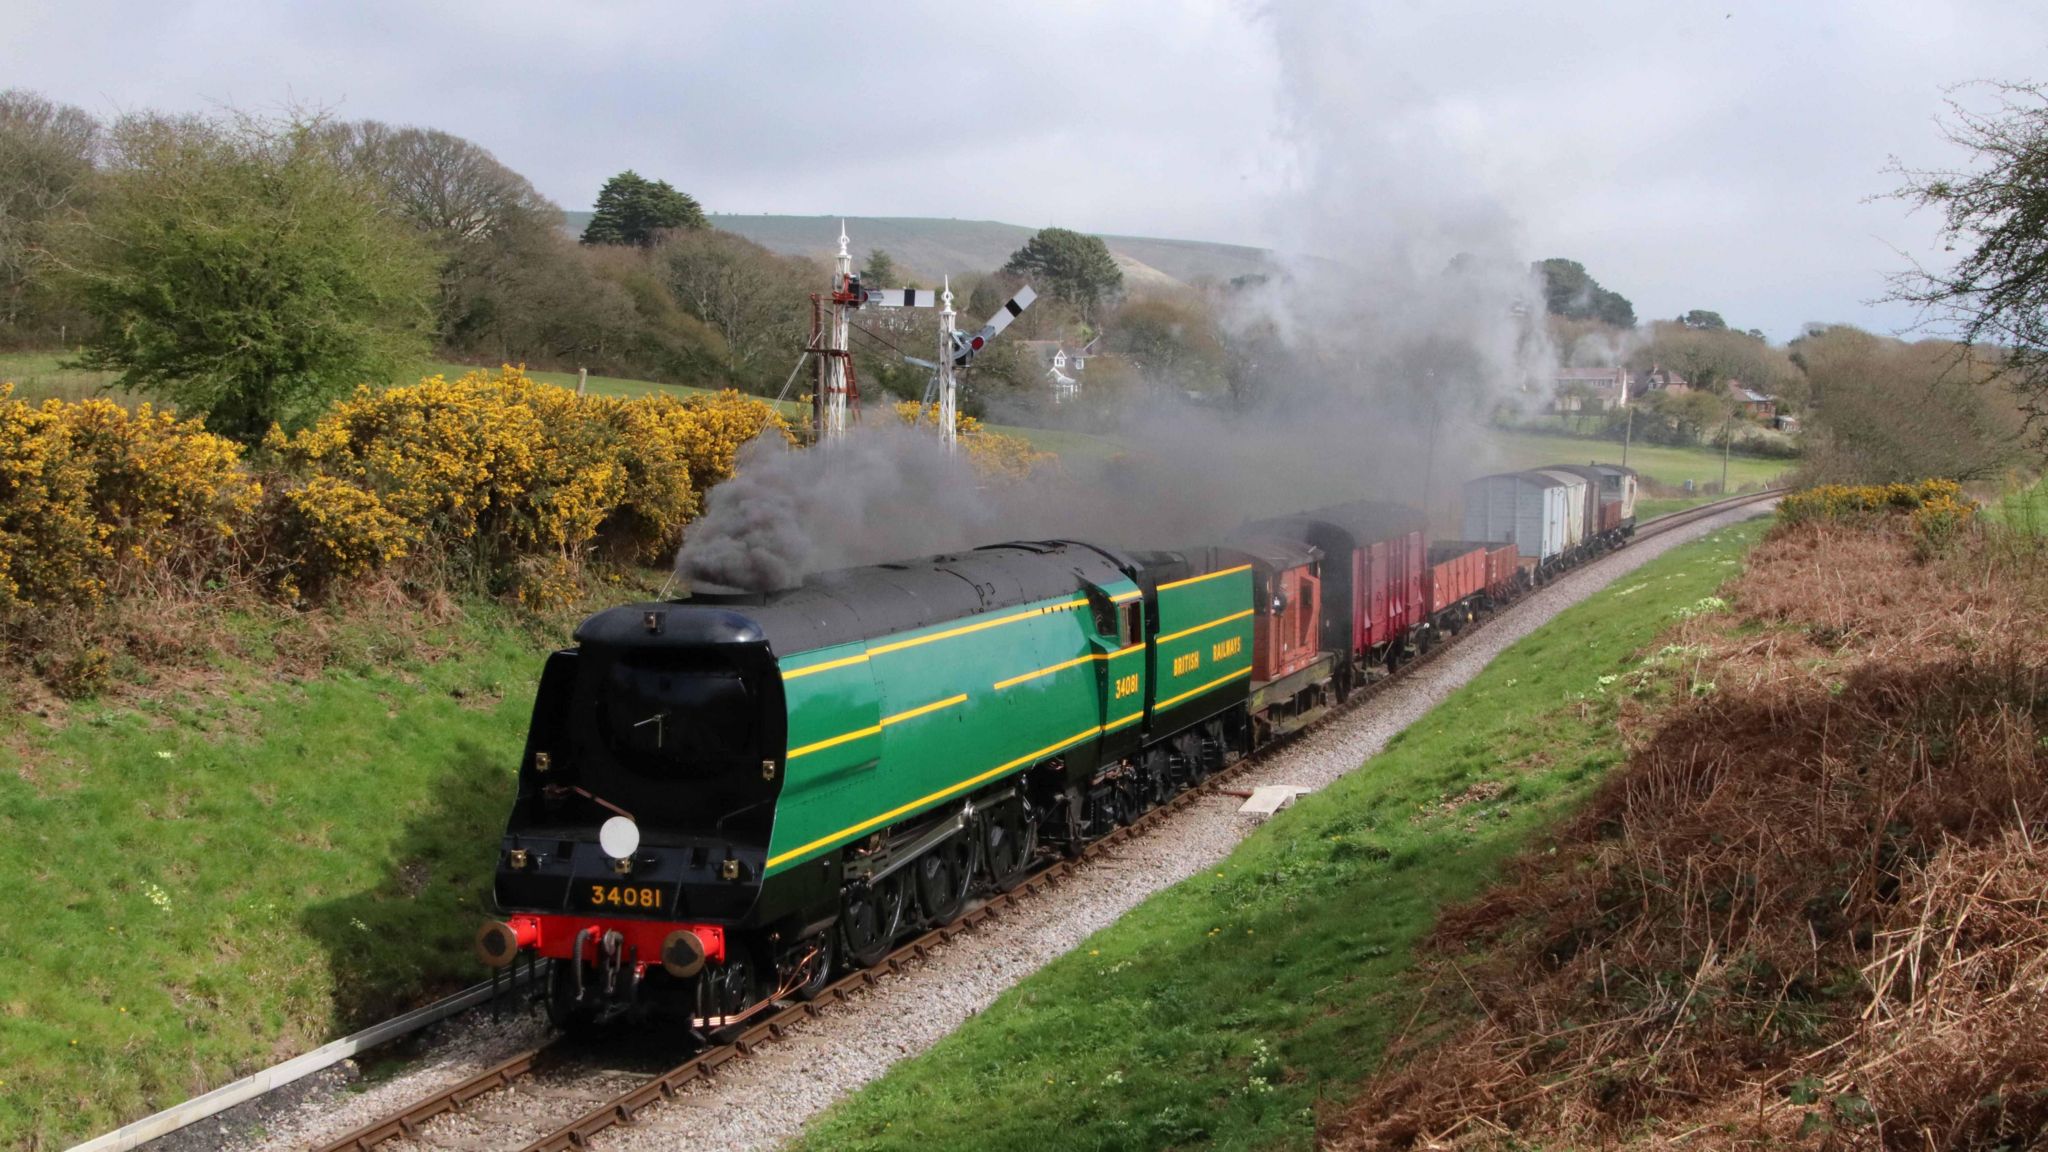 Green 1940s Bulleid Pacific class steam locomotive on a railway track with smoke pouring out in the countryside